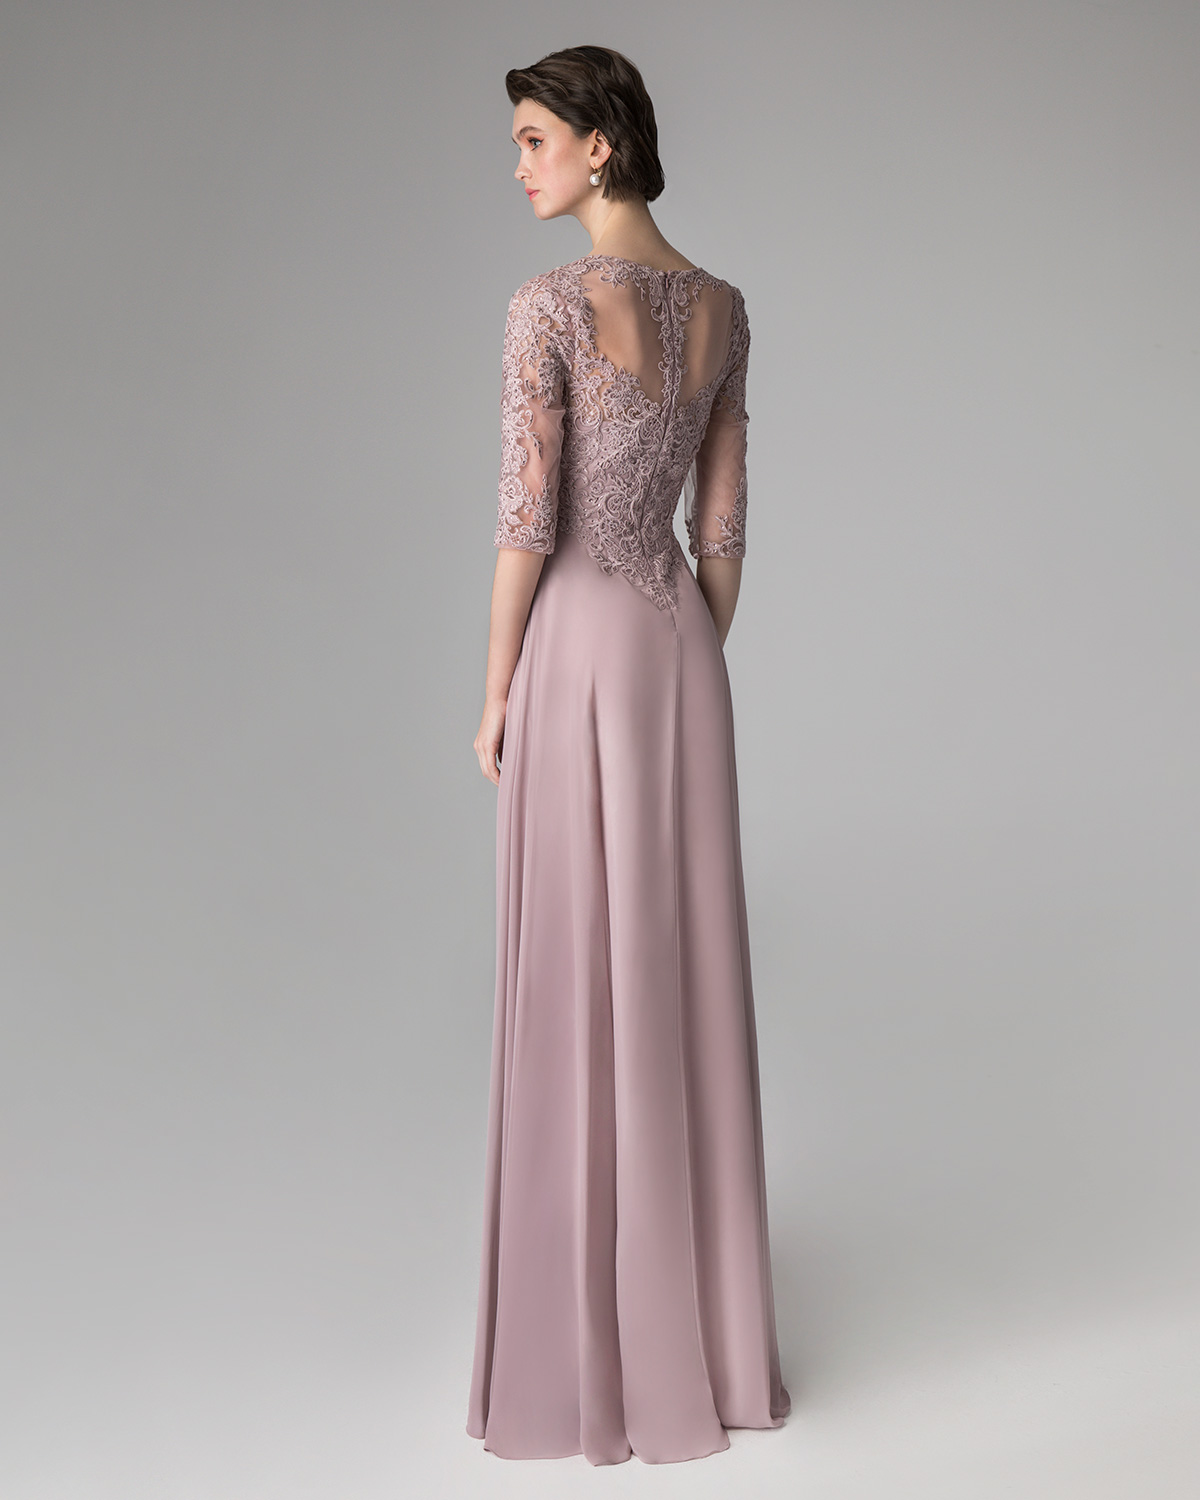 Classic Dresses / Long evening dress with applique lace on the top and long sleeves